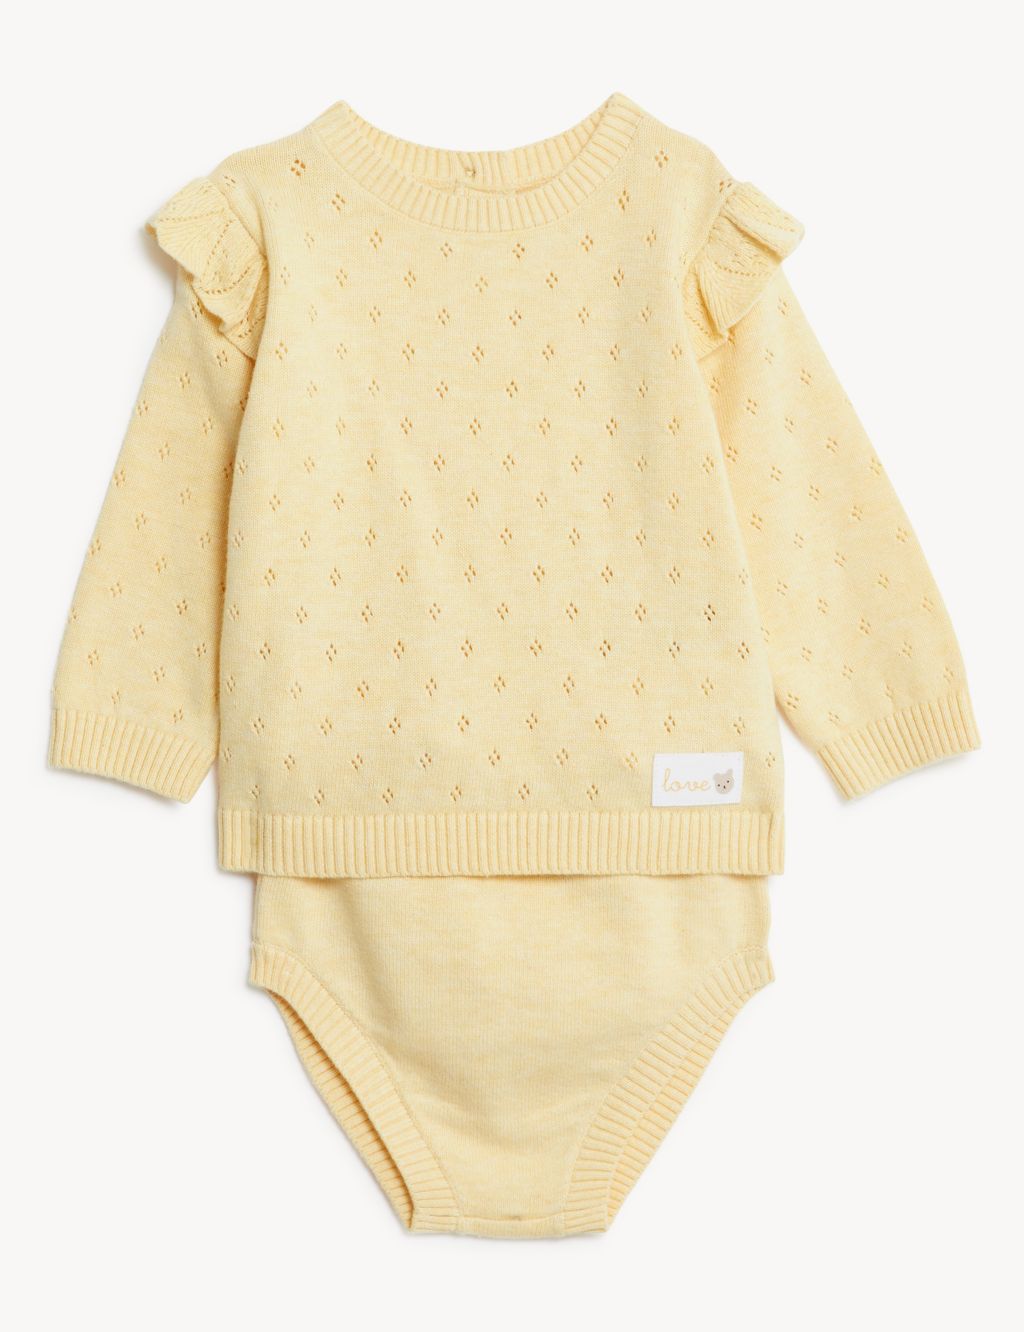 2pc Pure Cotton Knitted Outfit (7lbs - 12 Mths) image 1